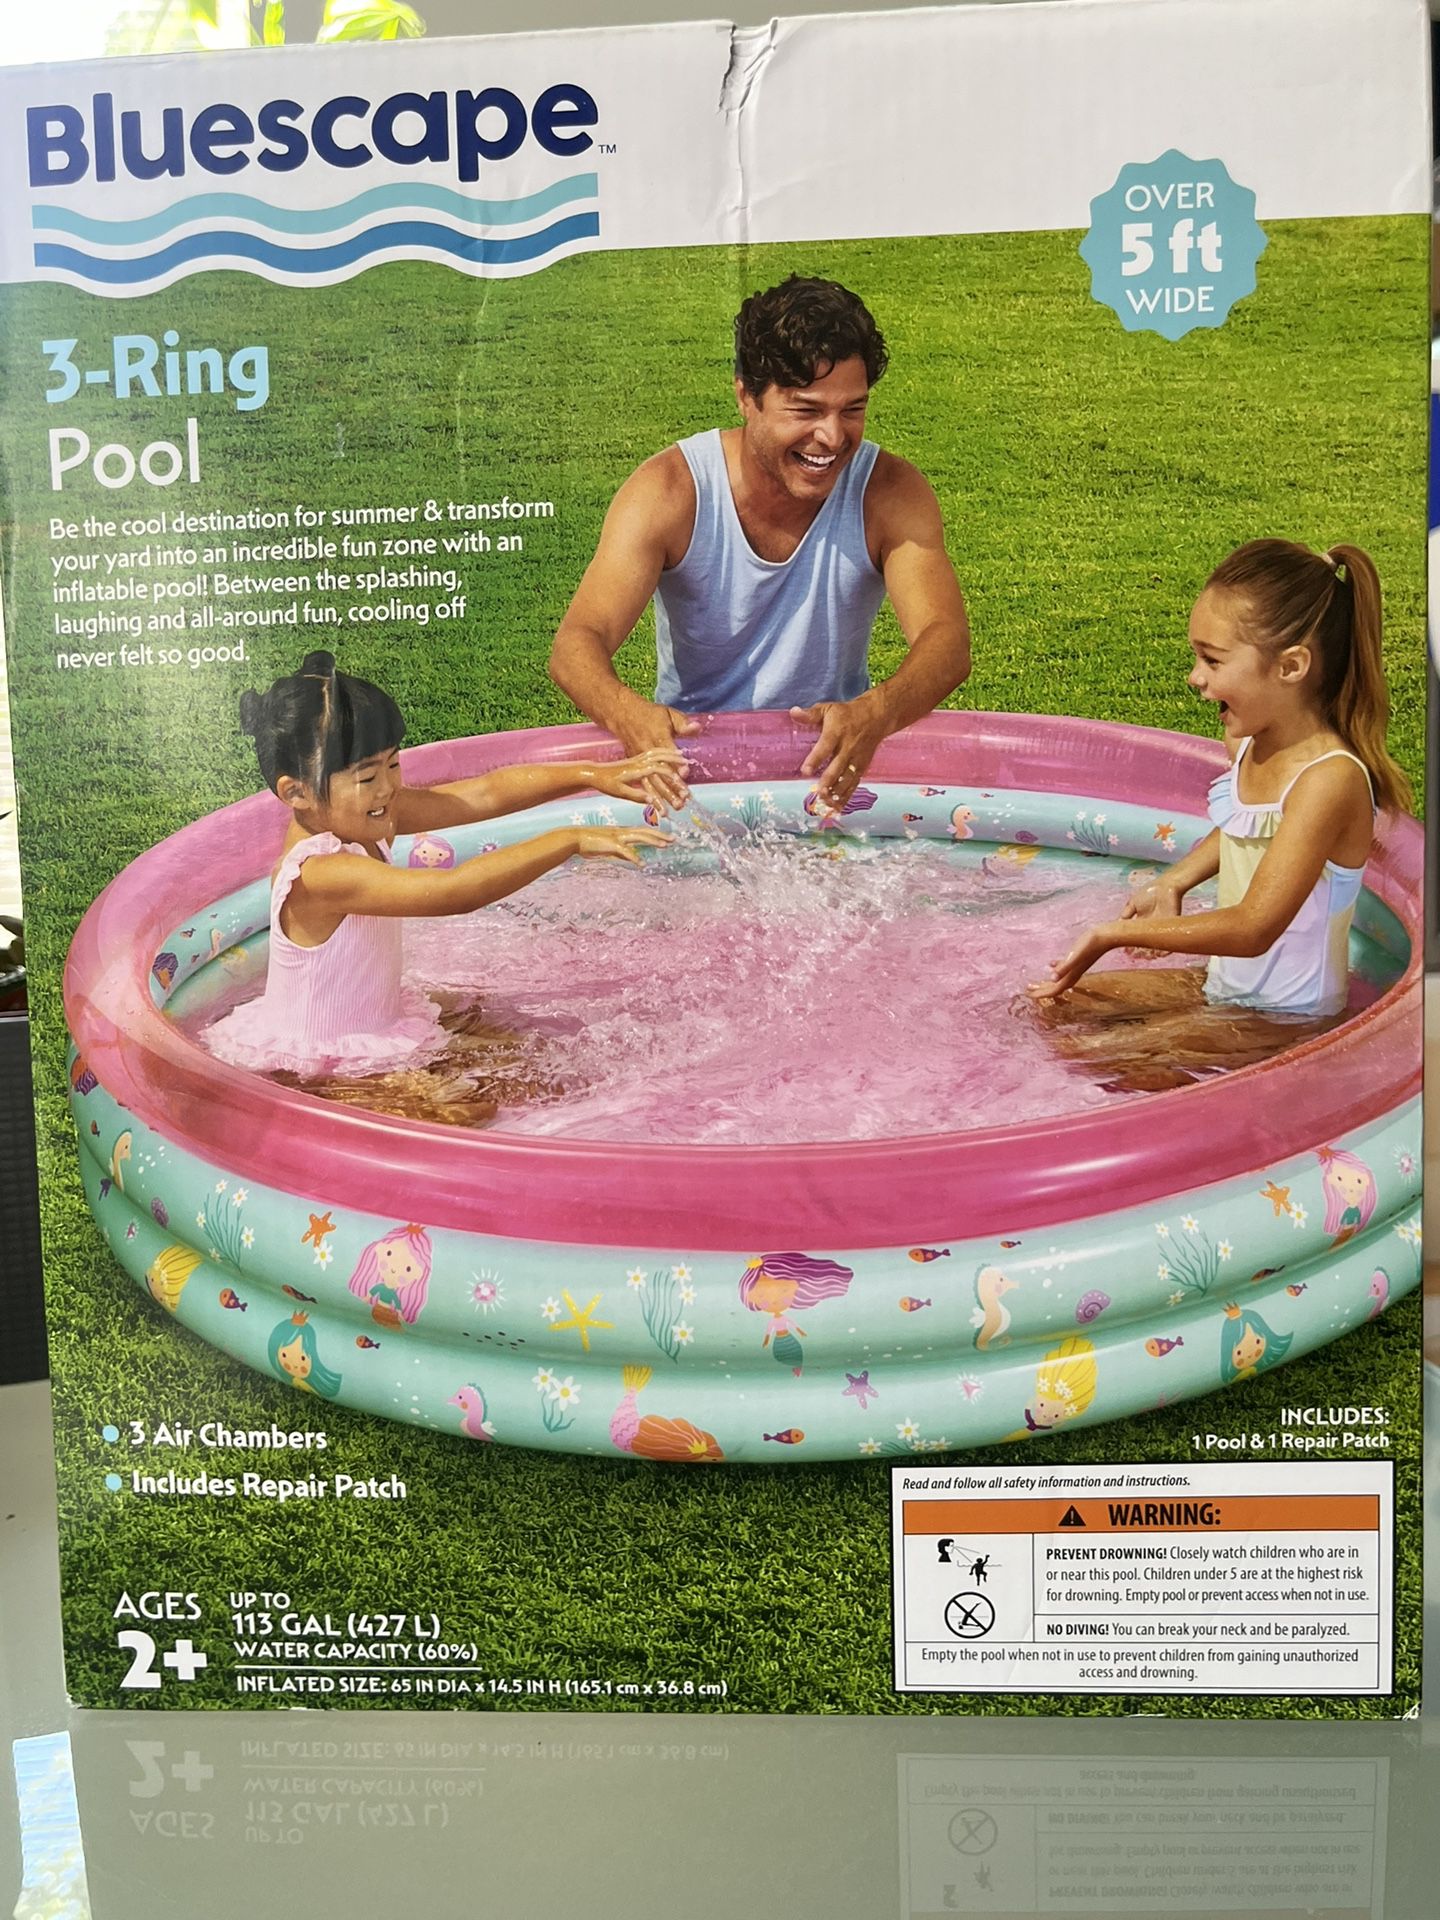 New Bluescape 3-ring Pool